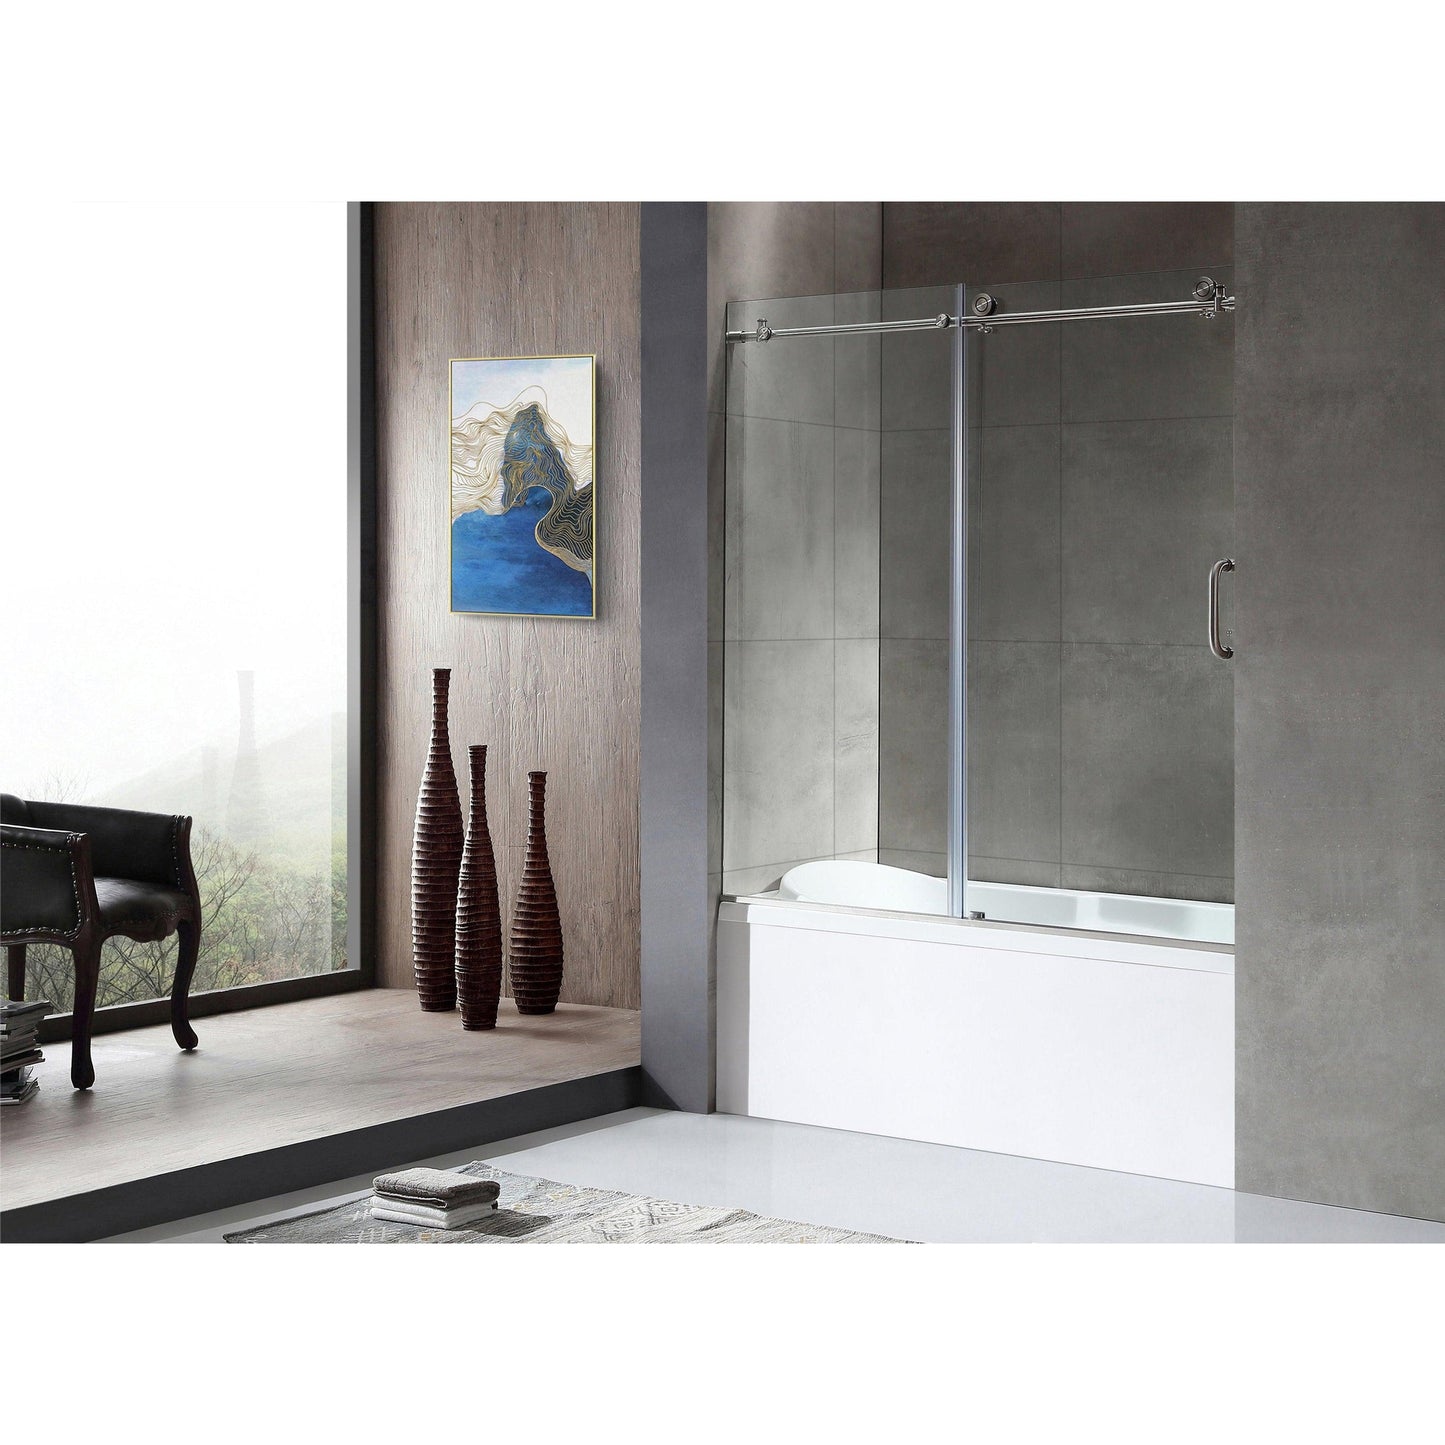 ANZZI Don Series White "60 x 30" Alcove Left Drain Rectangular Bathtub With Built-In Flange and Frameless Brushed Nickel Sliding Door